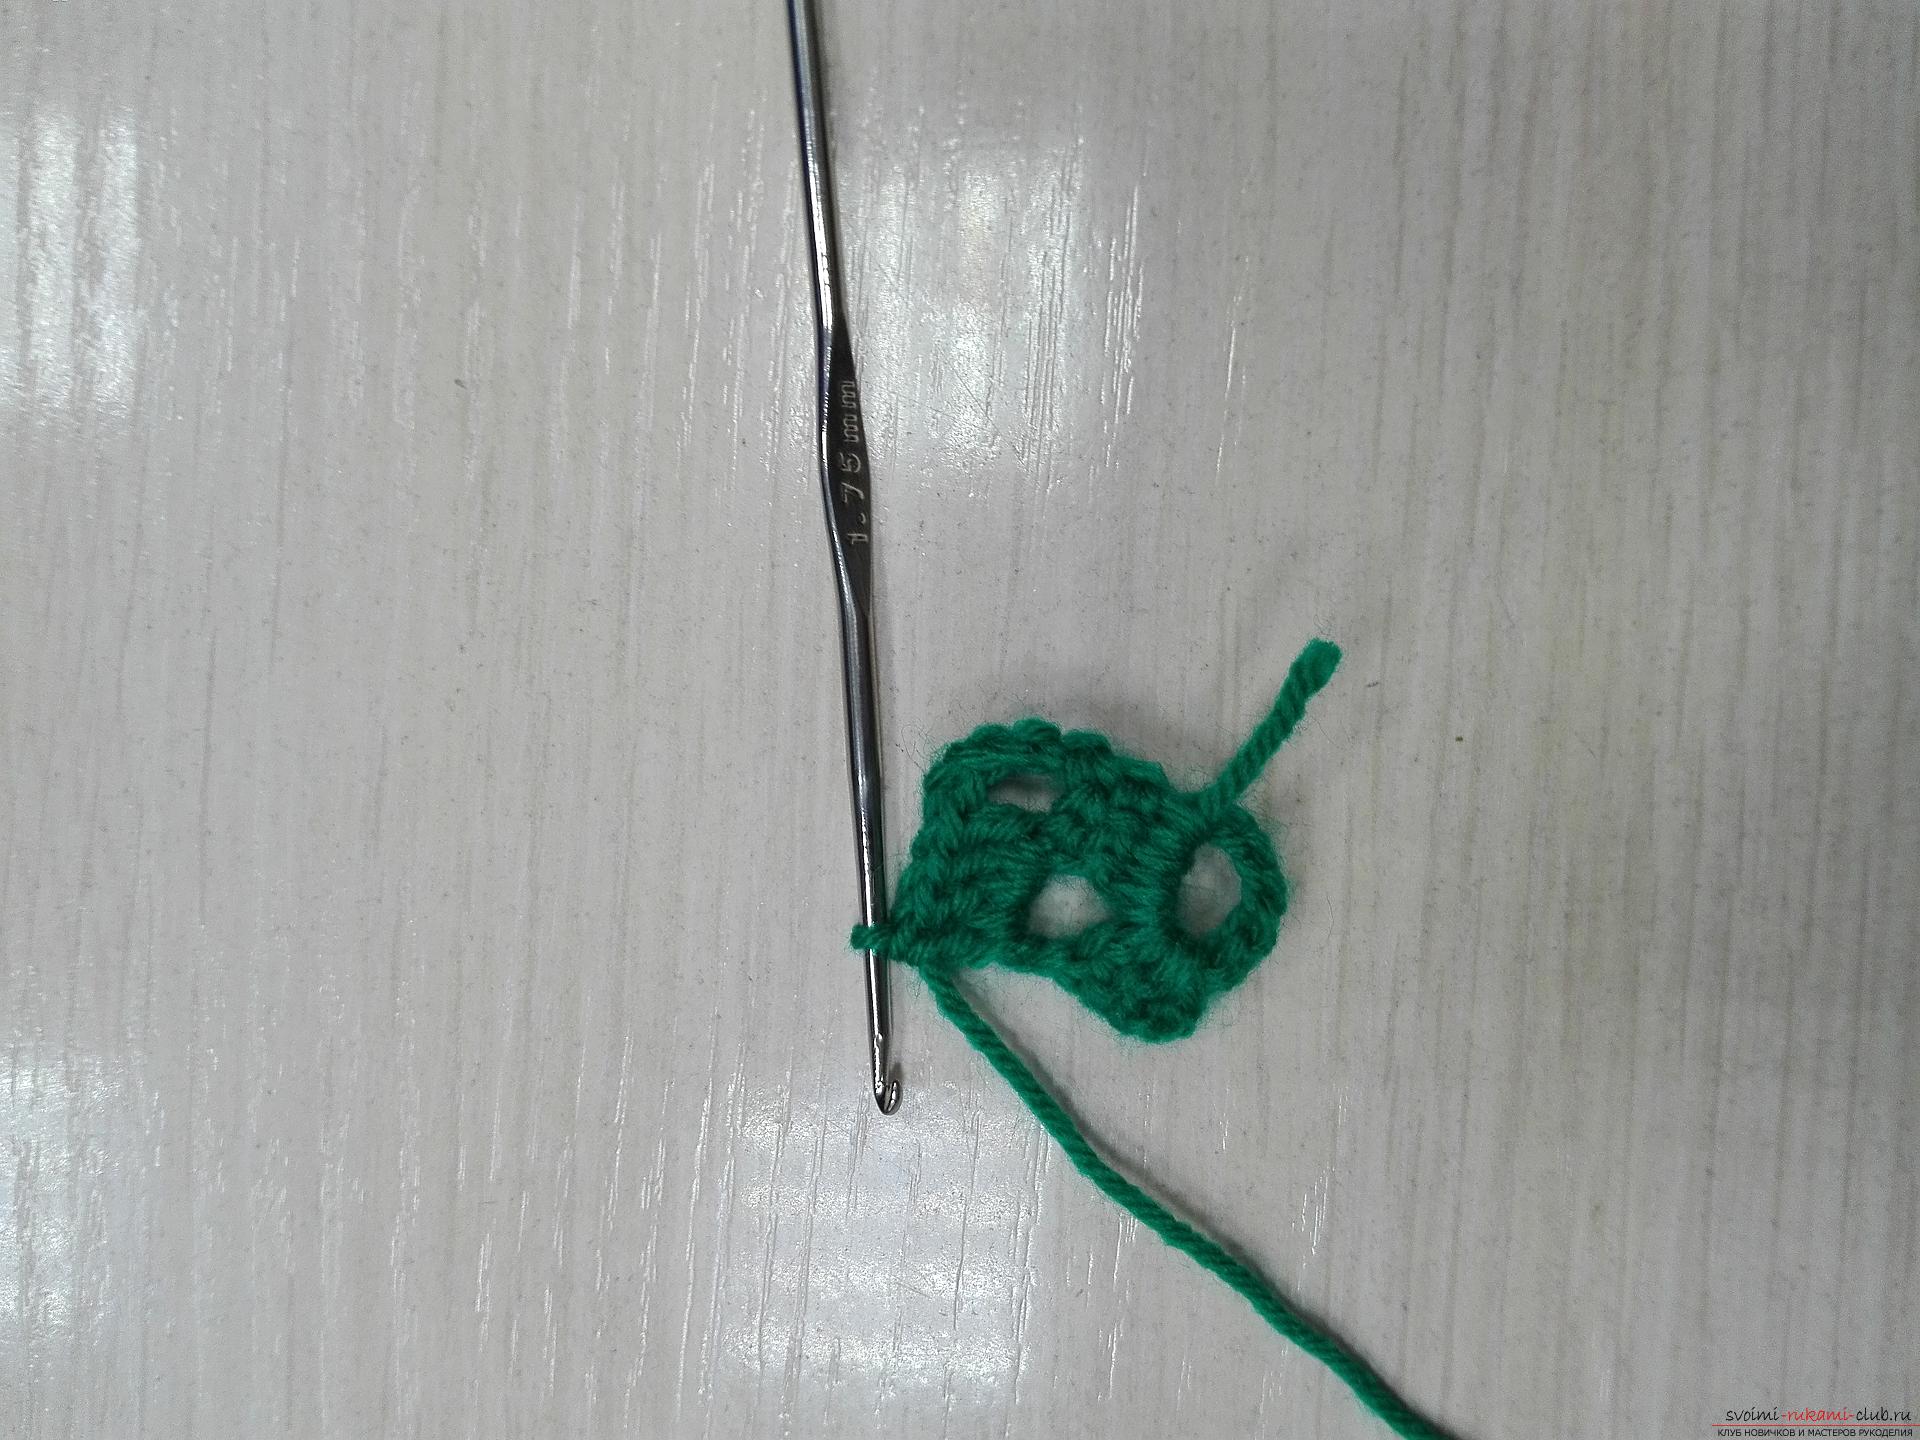 This master class on knitting is designed by the lover - he will teach how to tie the heart crochet. Picture №3